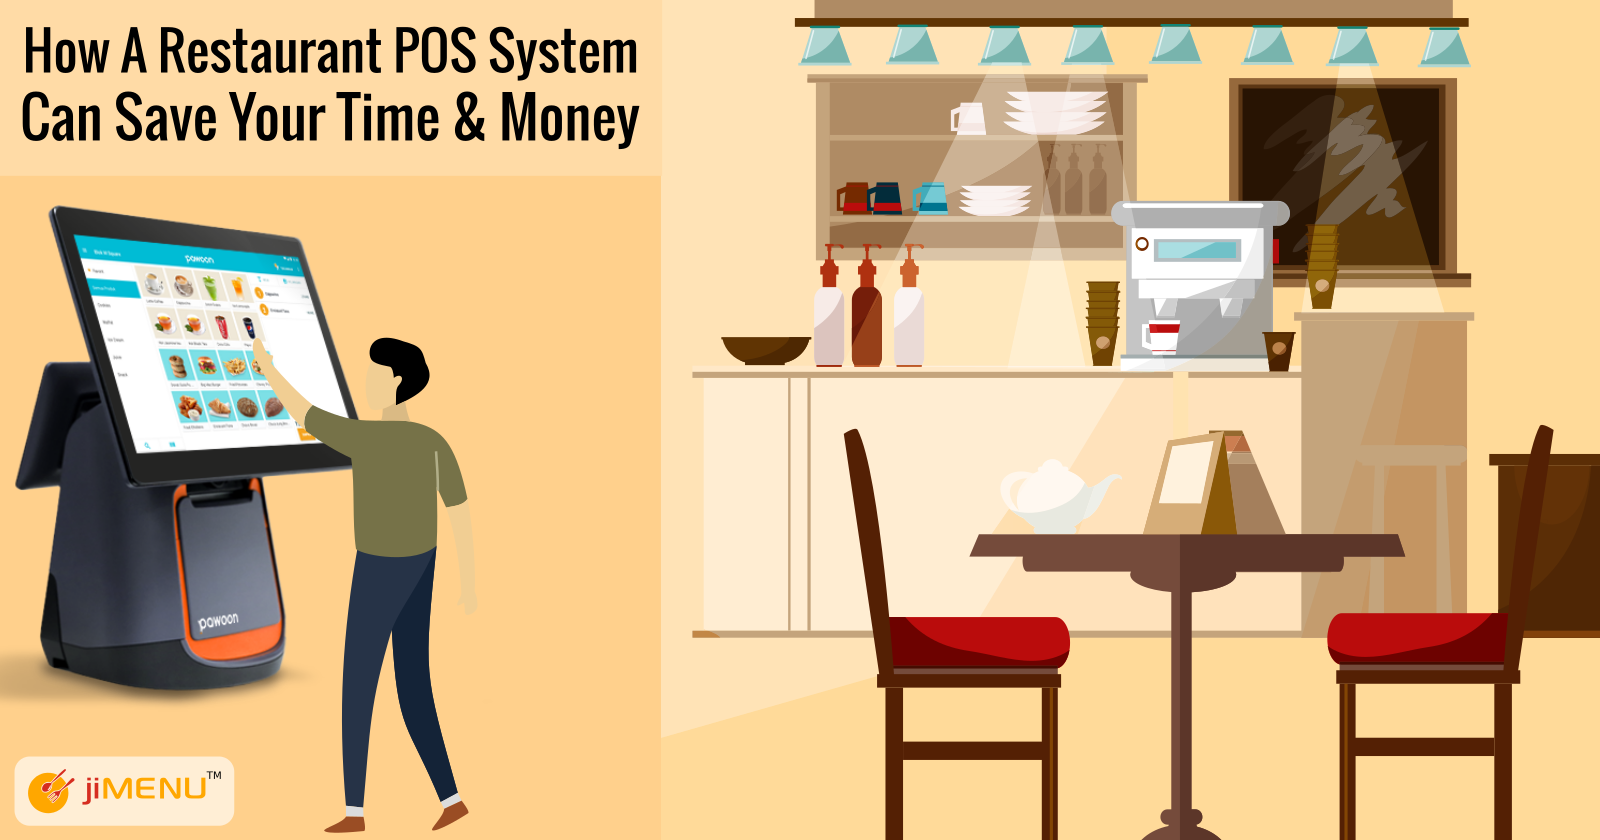 How a Restaurant POS System Can Save You Time & Money